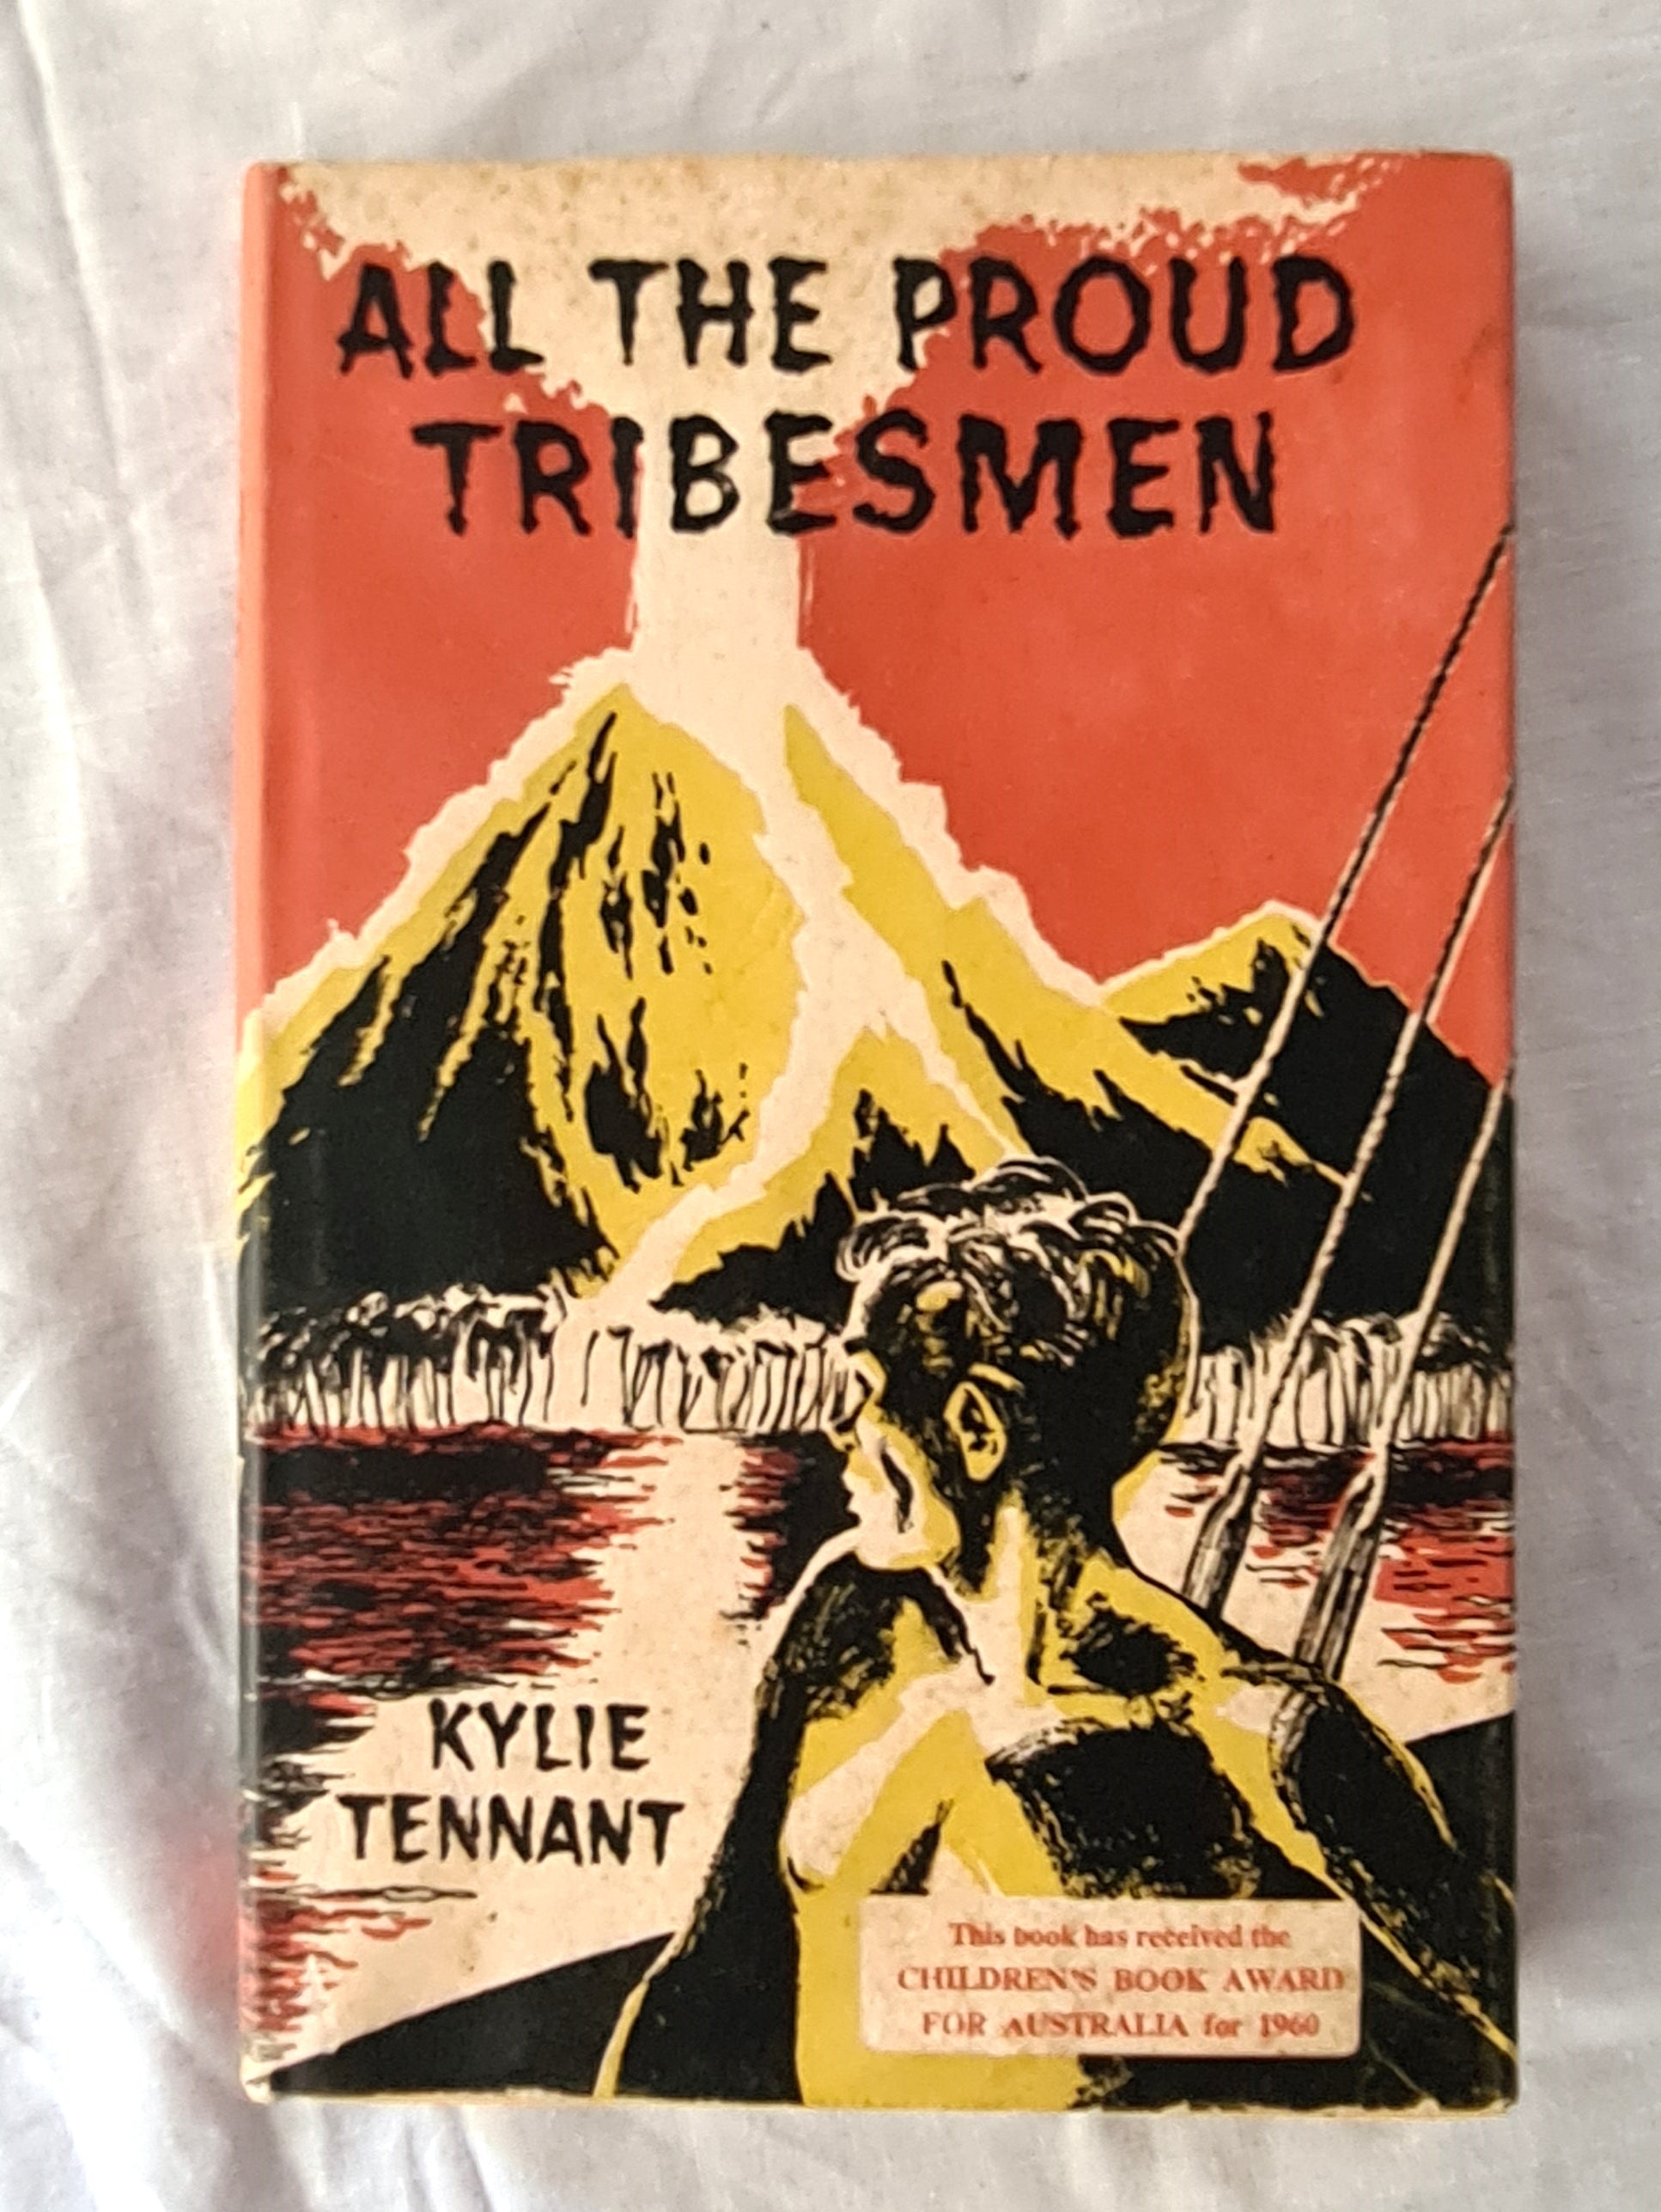 All The Proud Tribesmen  by Kylie Tennant  Illustrations by Clem Seale